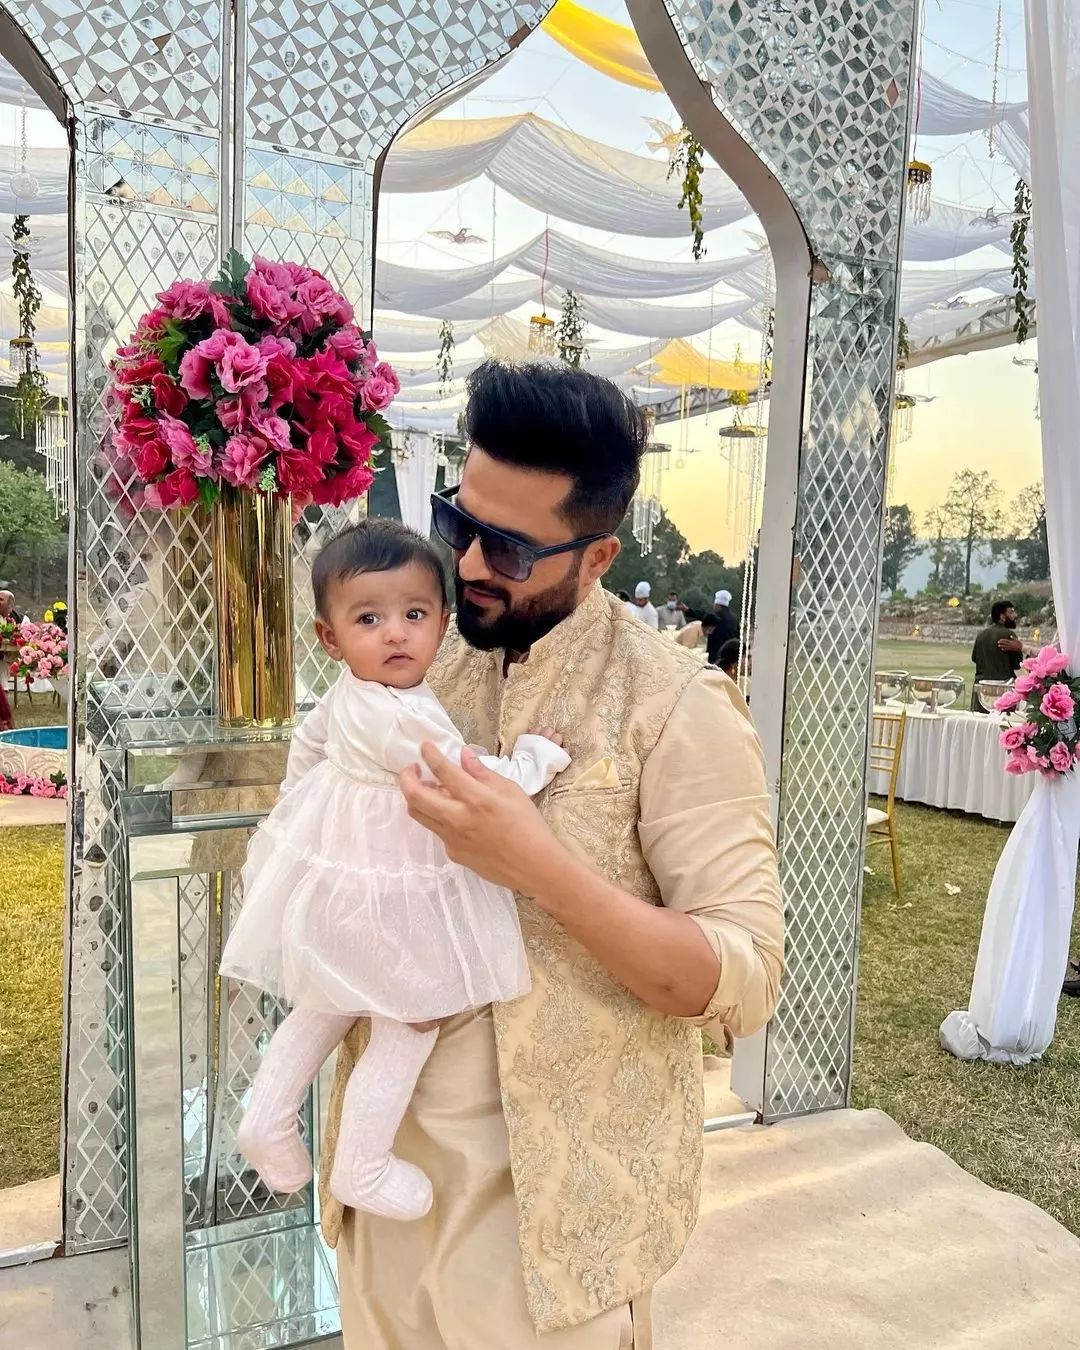 Sarah Khan and Falak Shabir Gorgeous Pictures from Wedding